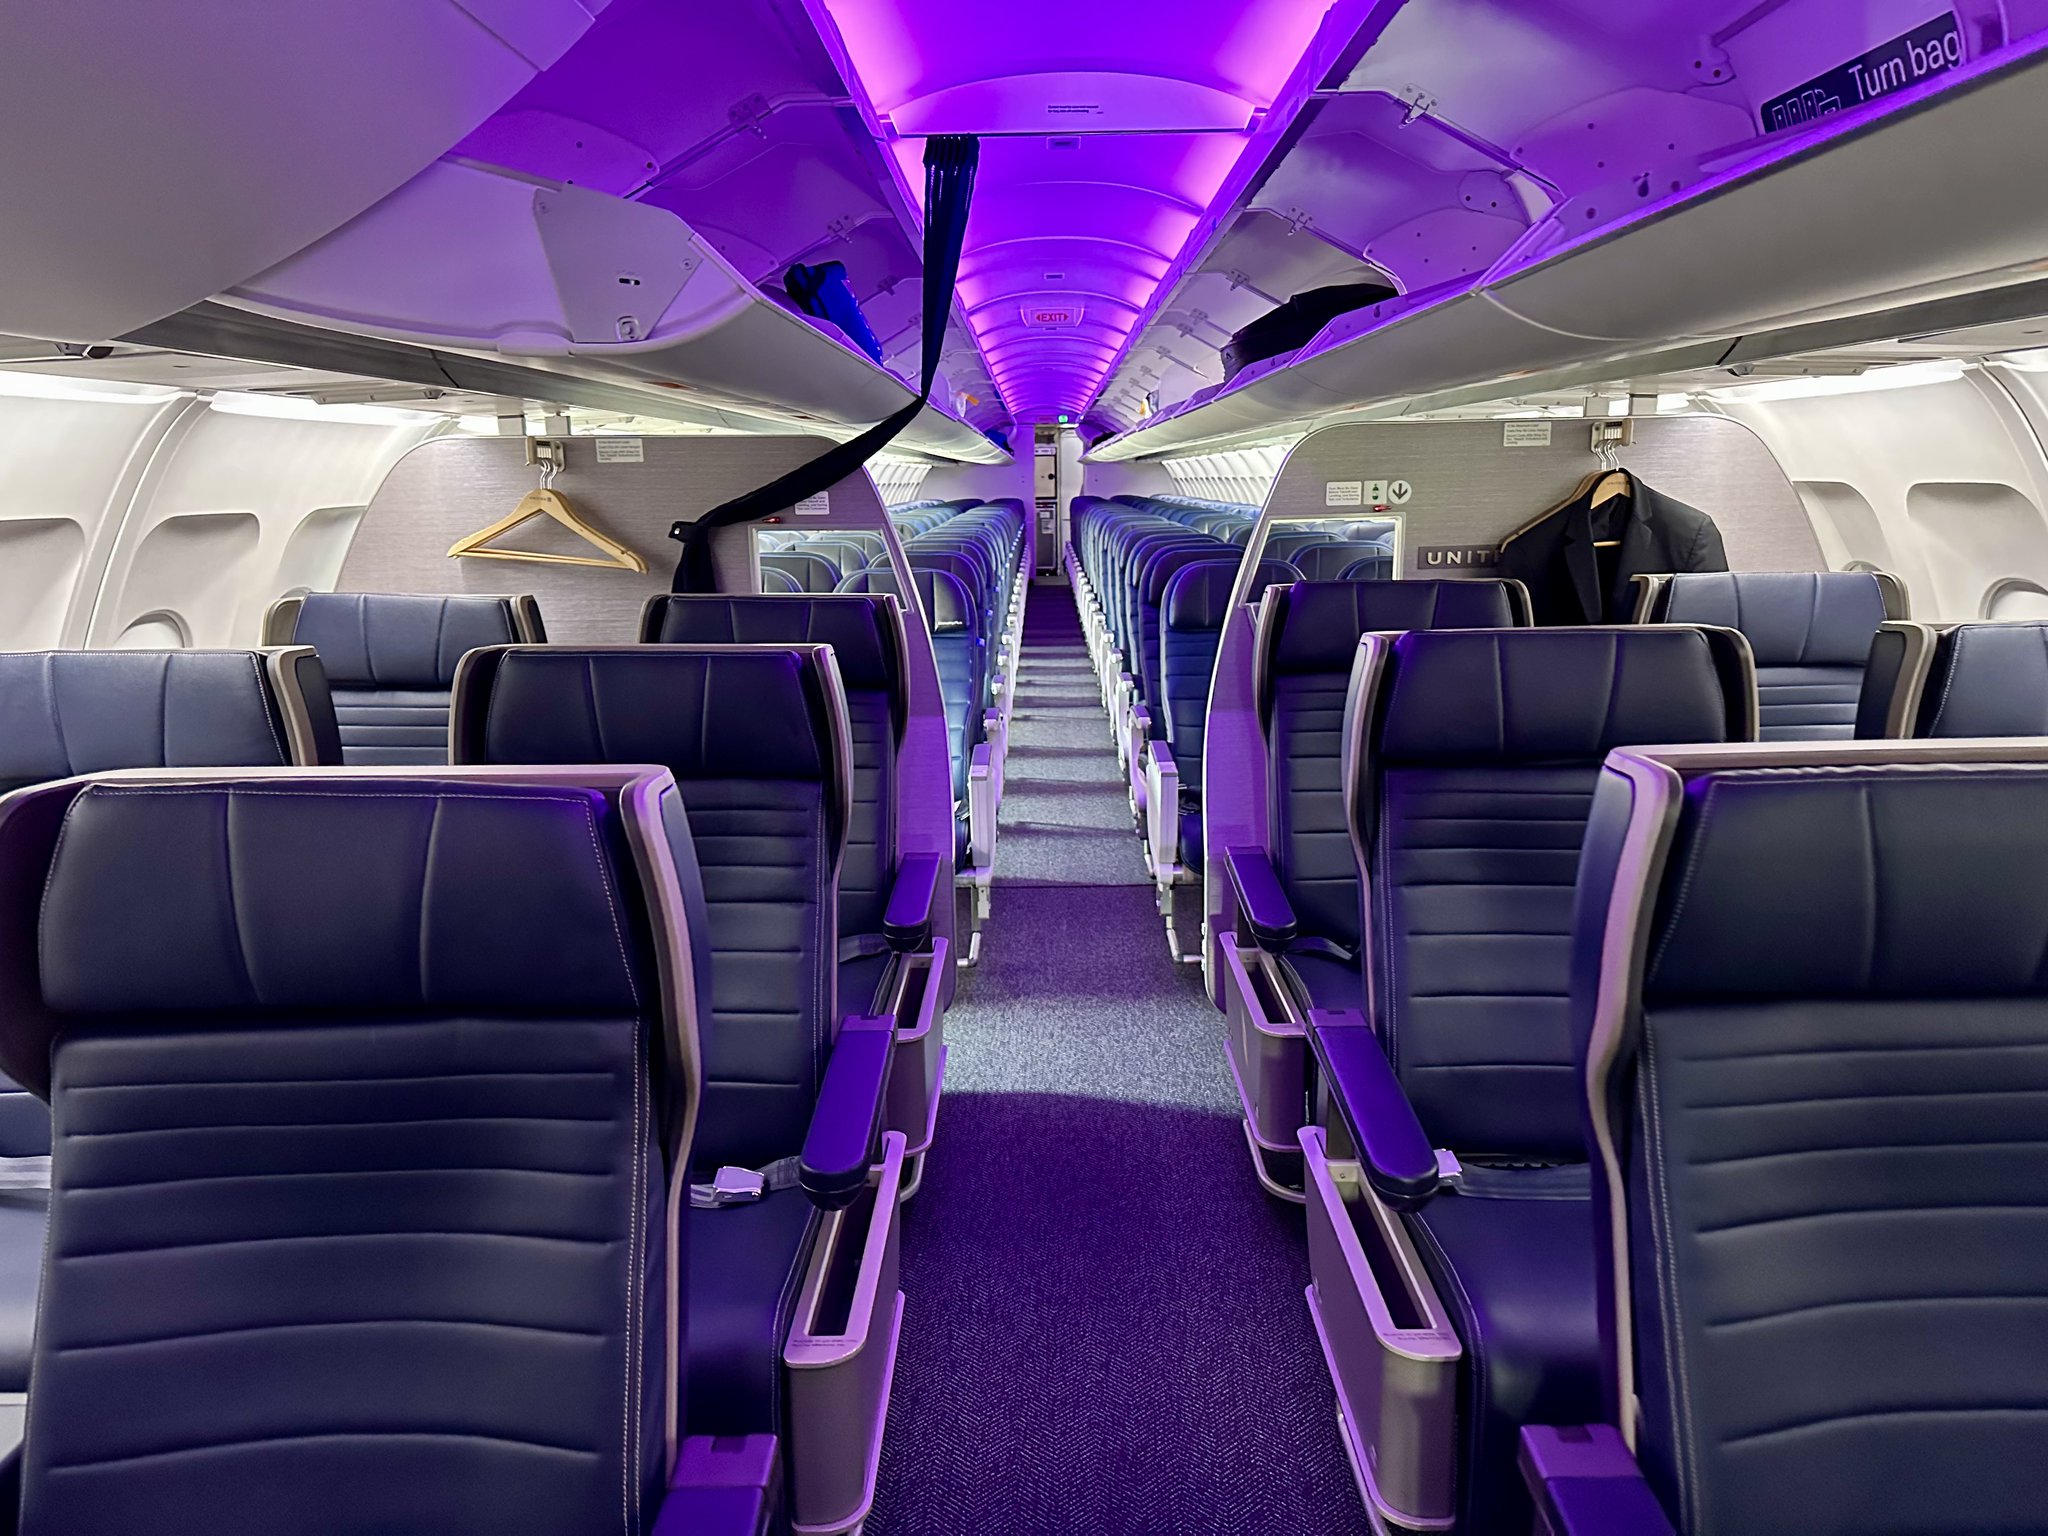 What Is It Like to Fly on United's Upgraded Airbus A319?